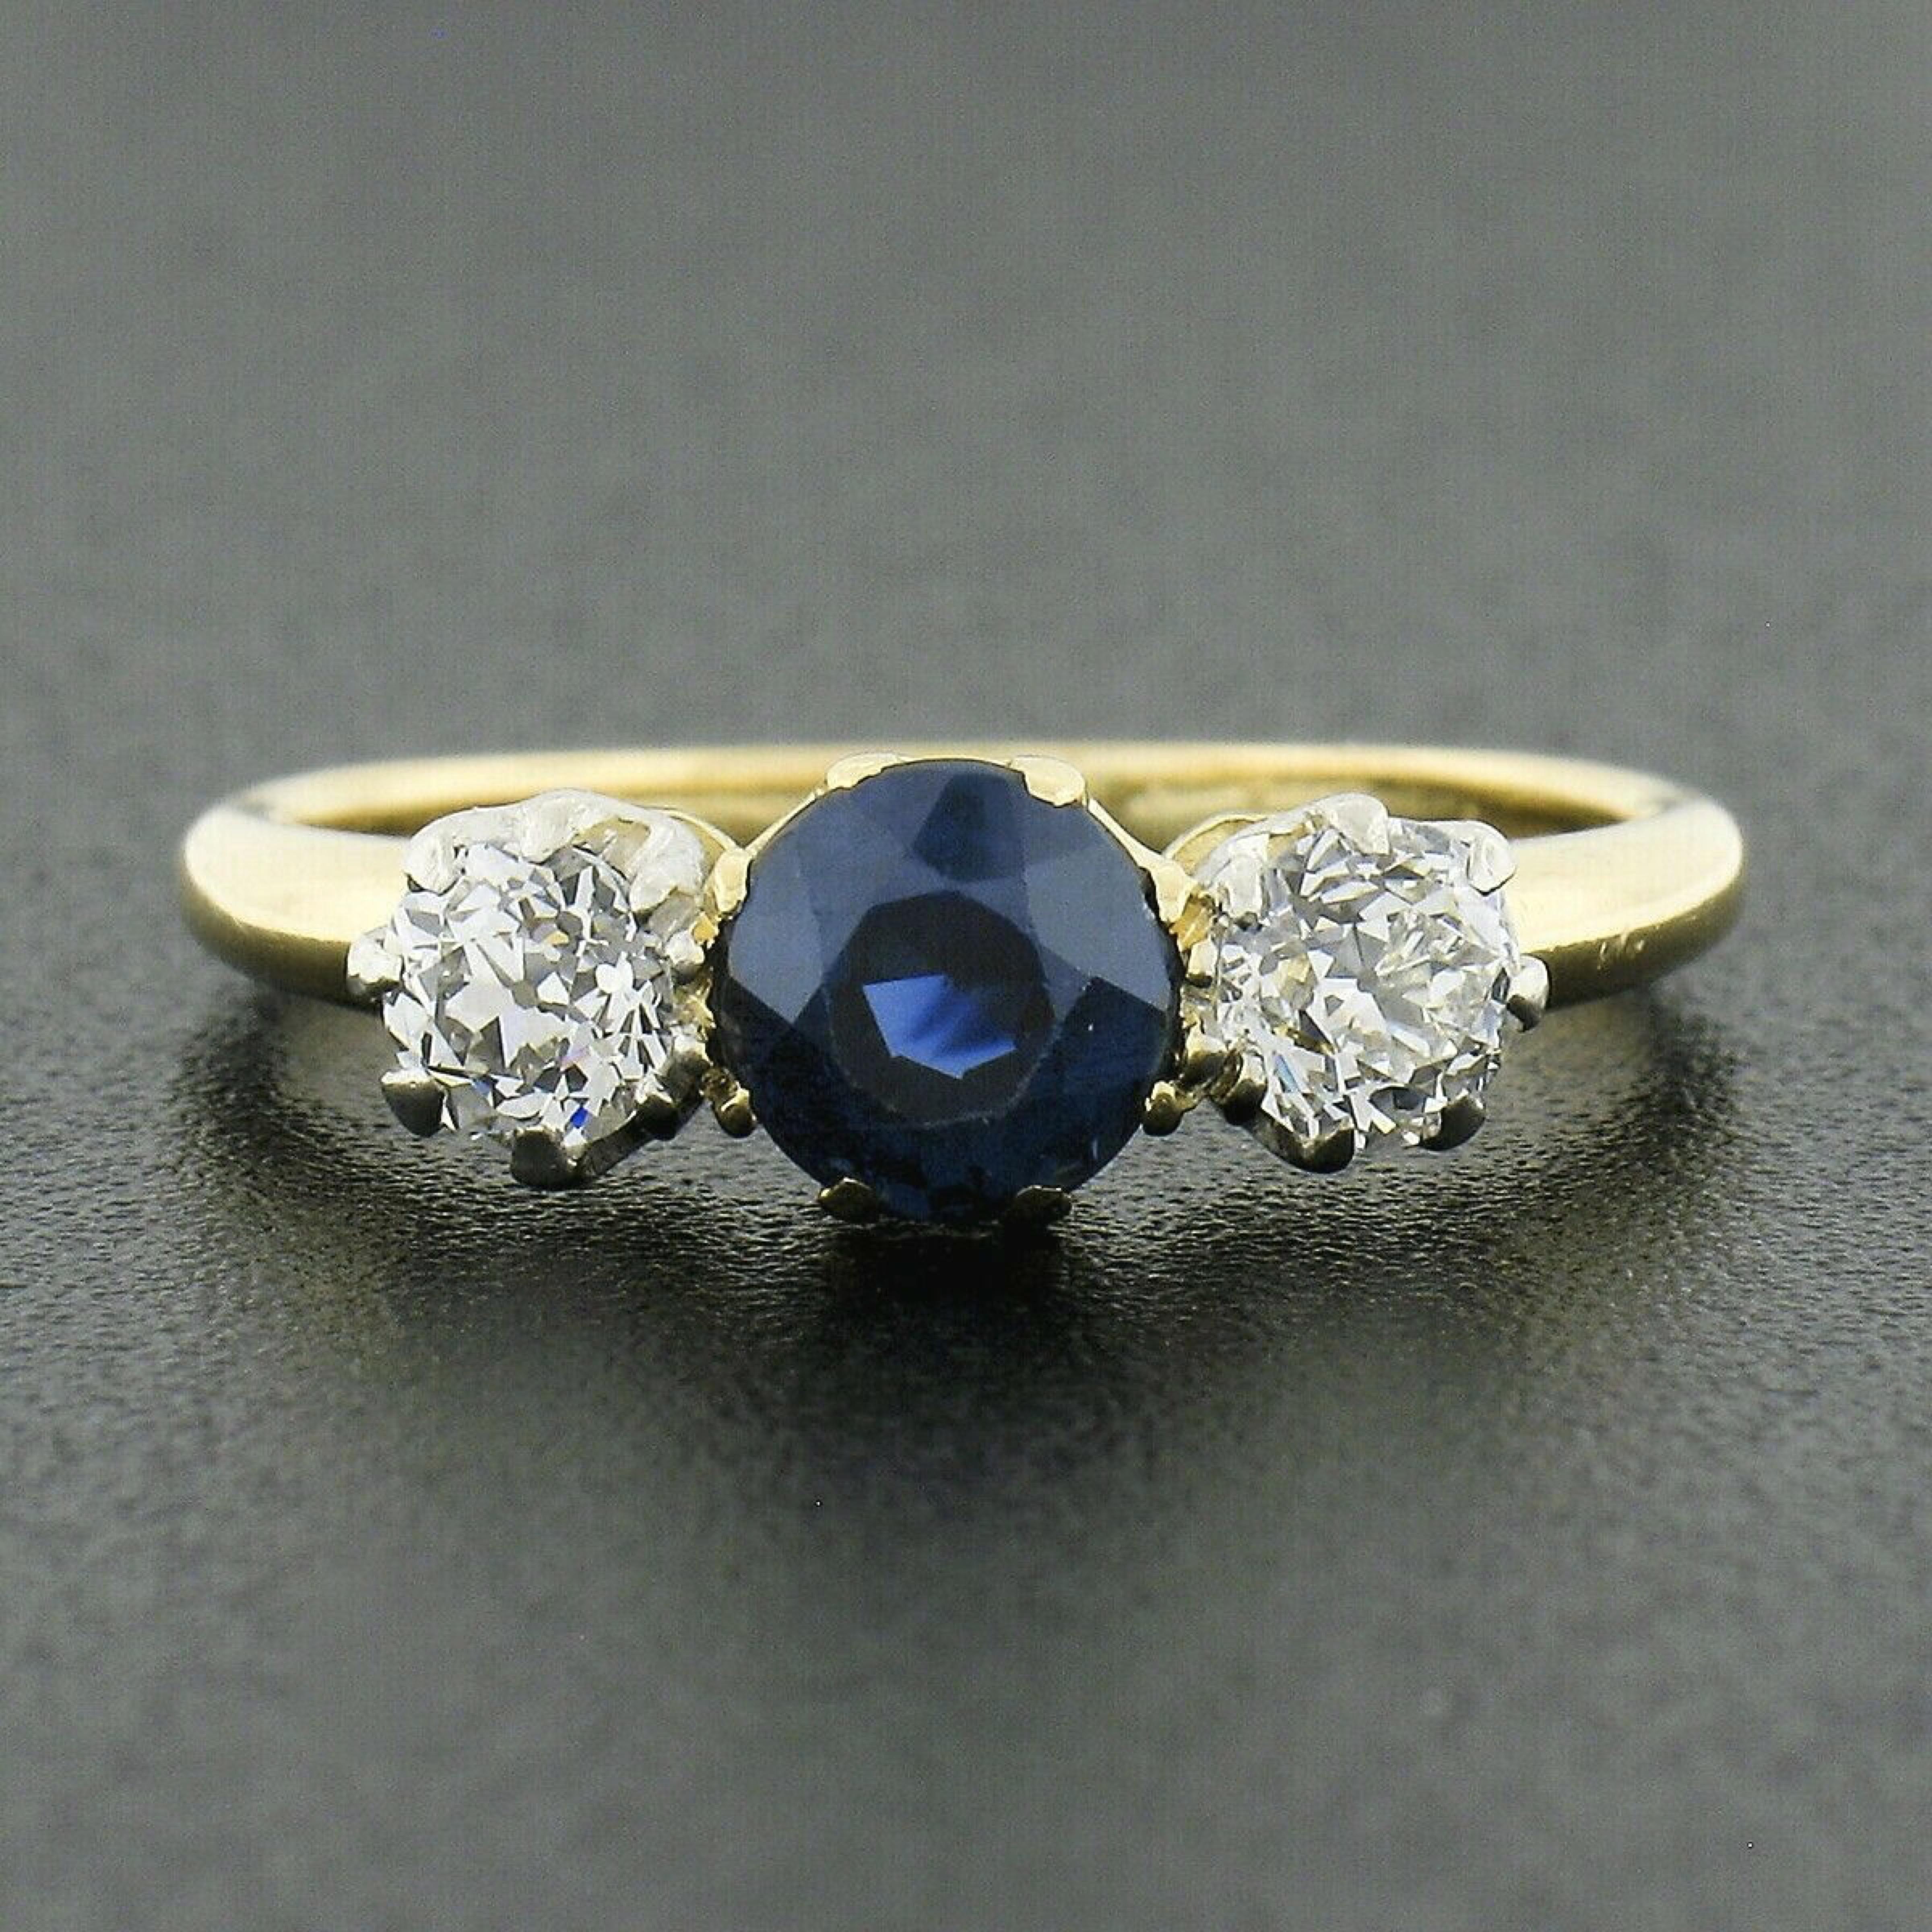 This gorgeous all original antique sapphire and diamond ring was crafted from solid 18k yellow gold during the Edwardian period. It features an elegant three-stone design set at its center with a stunning, older round cut, natural sapphire gemstone